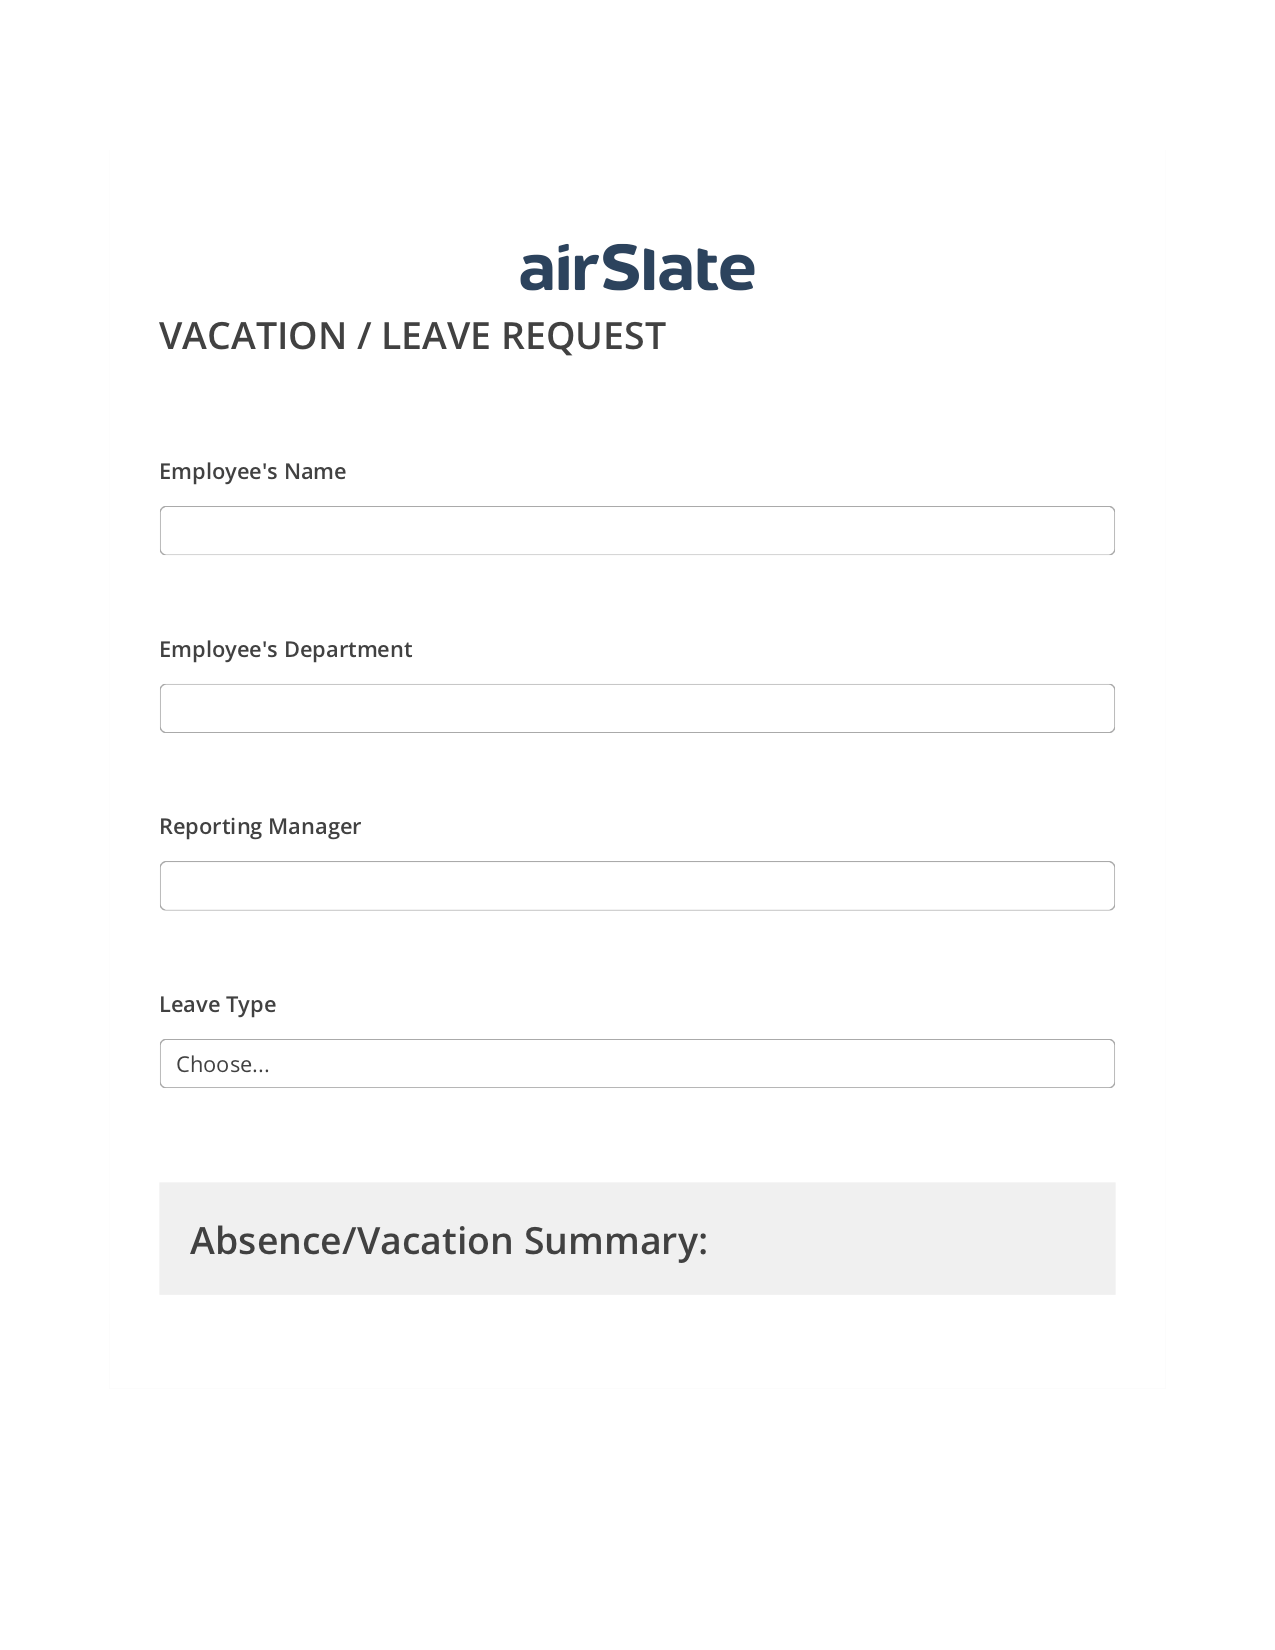 Vacation/Leave Request Workflow Prefill from NetSuite records, Reminder Bot, Archive to Google Drive Bot